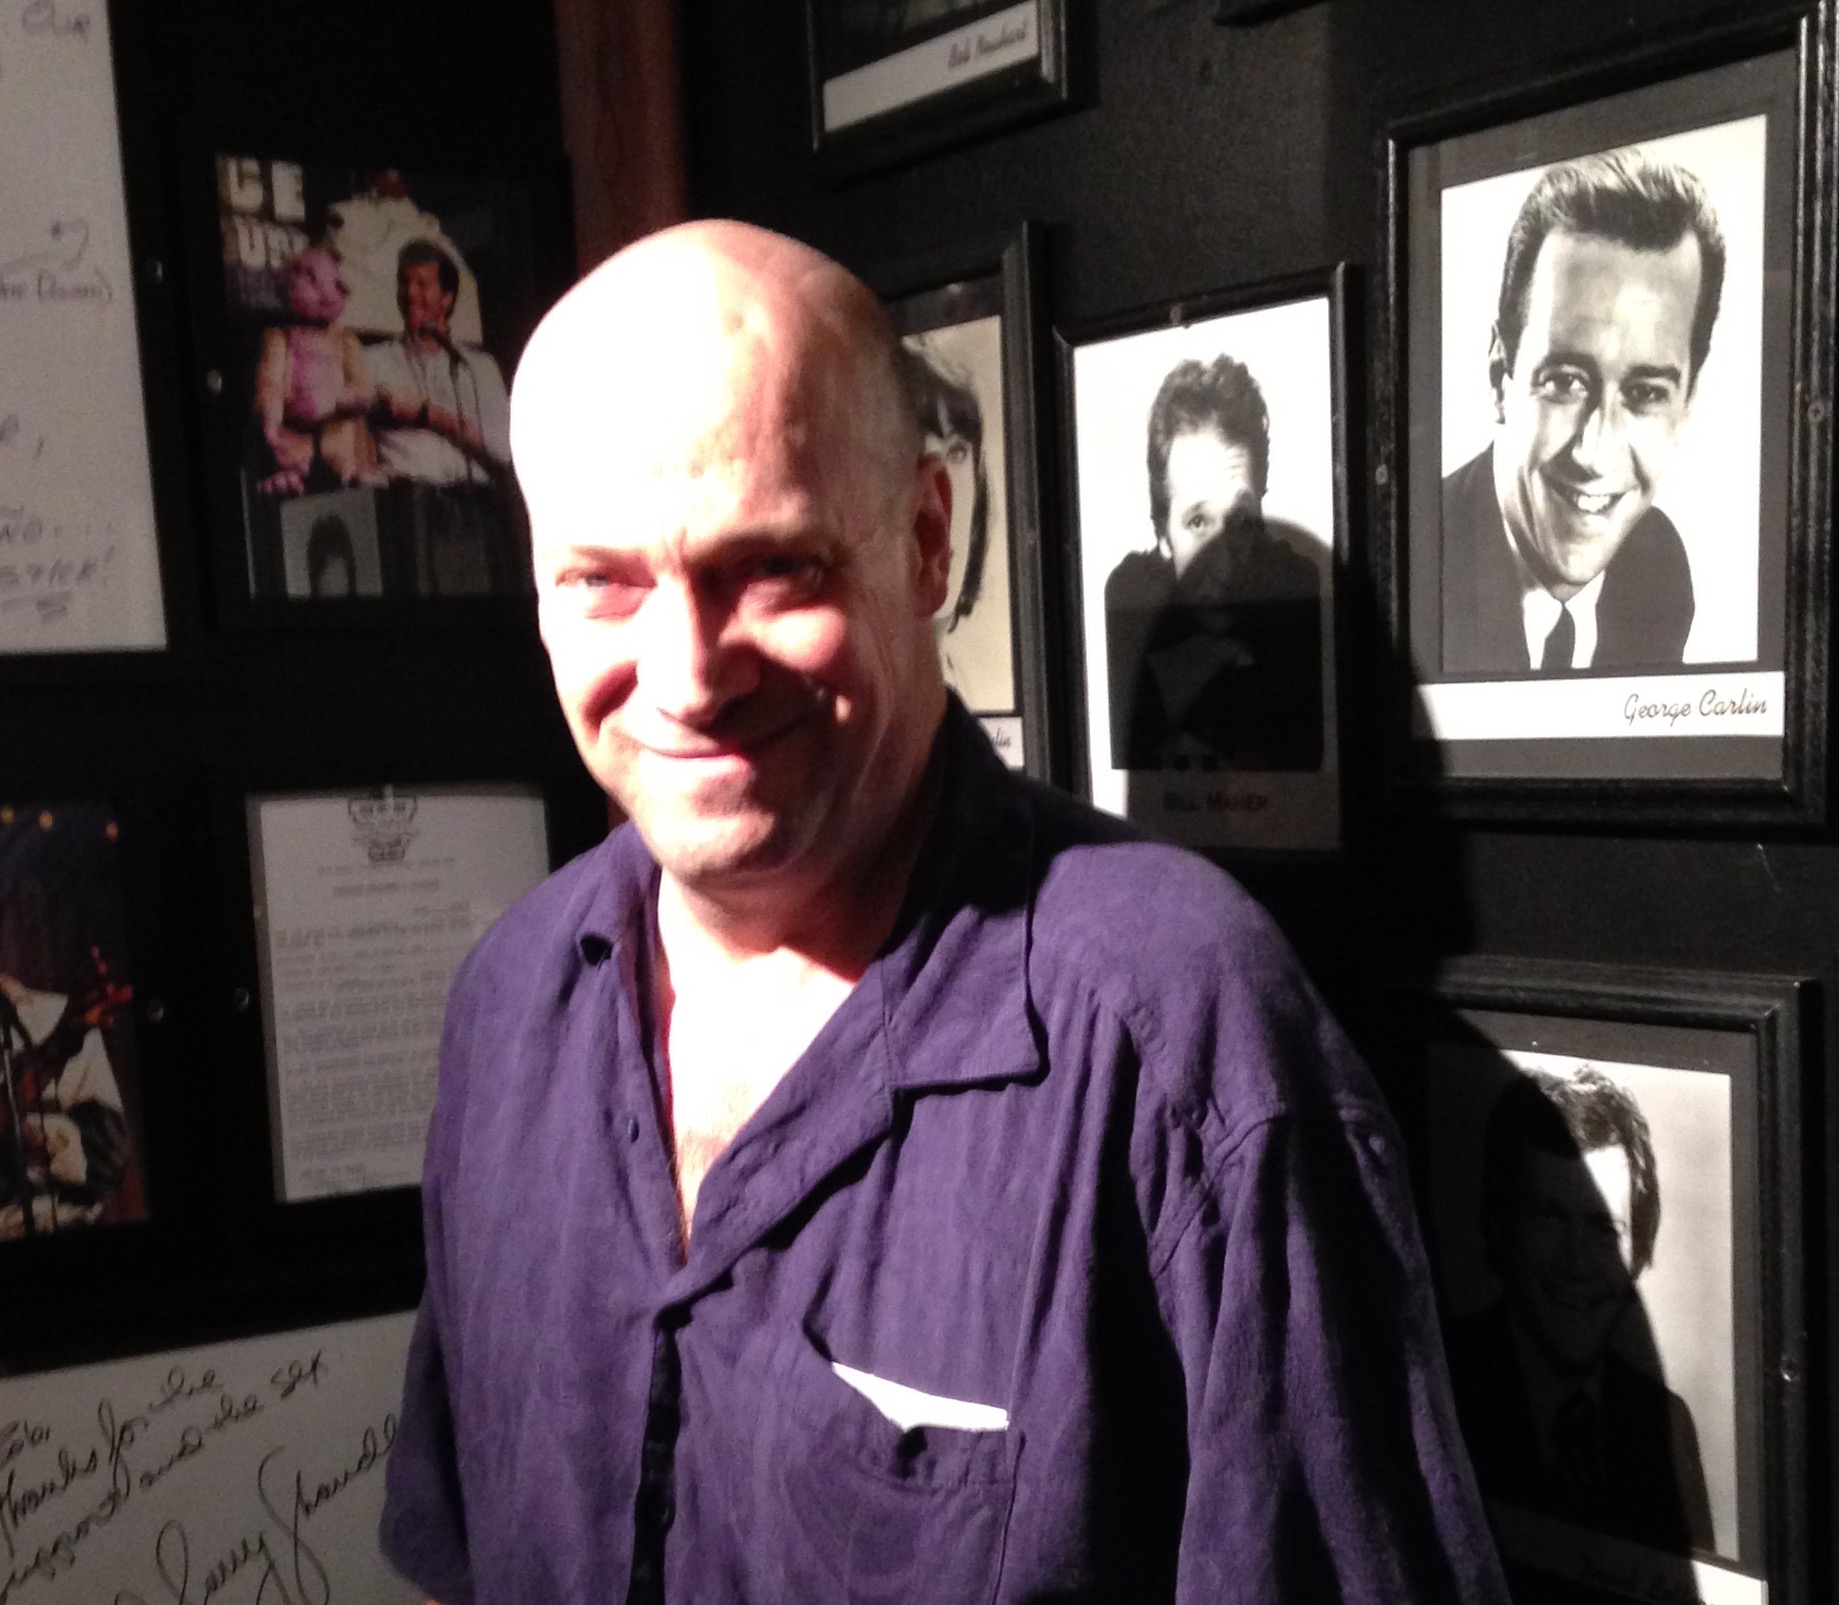 Phil Perrier, Stand-up Comedian, The Ice House, Pasadena, California